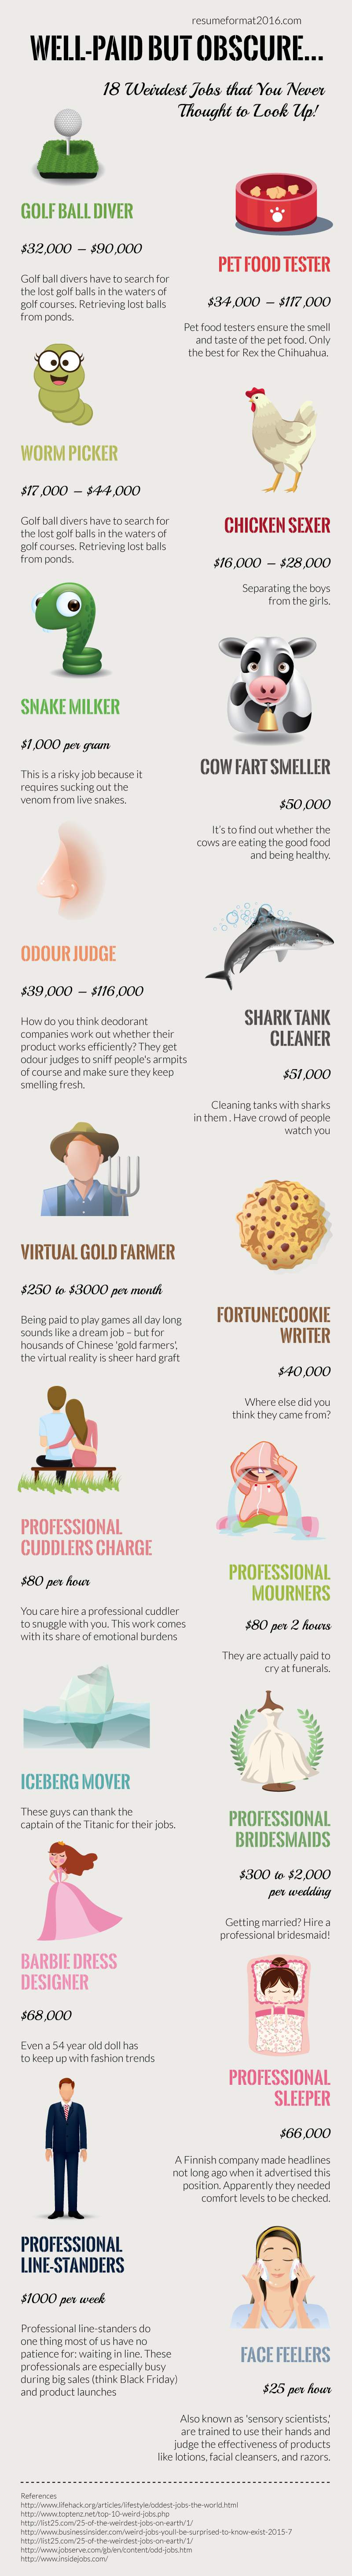 Well Paid But Obscure 18 Weirdest Jobs That You Never Thought To Look Up Infographic Portal